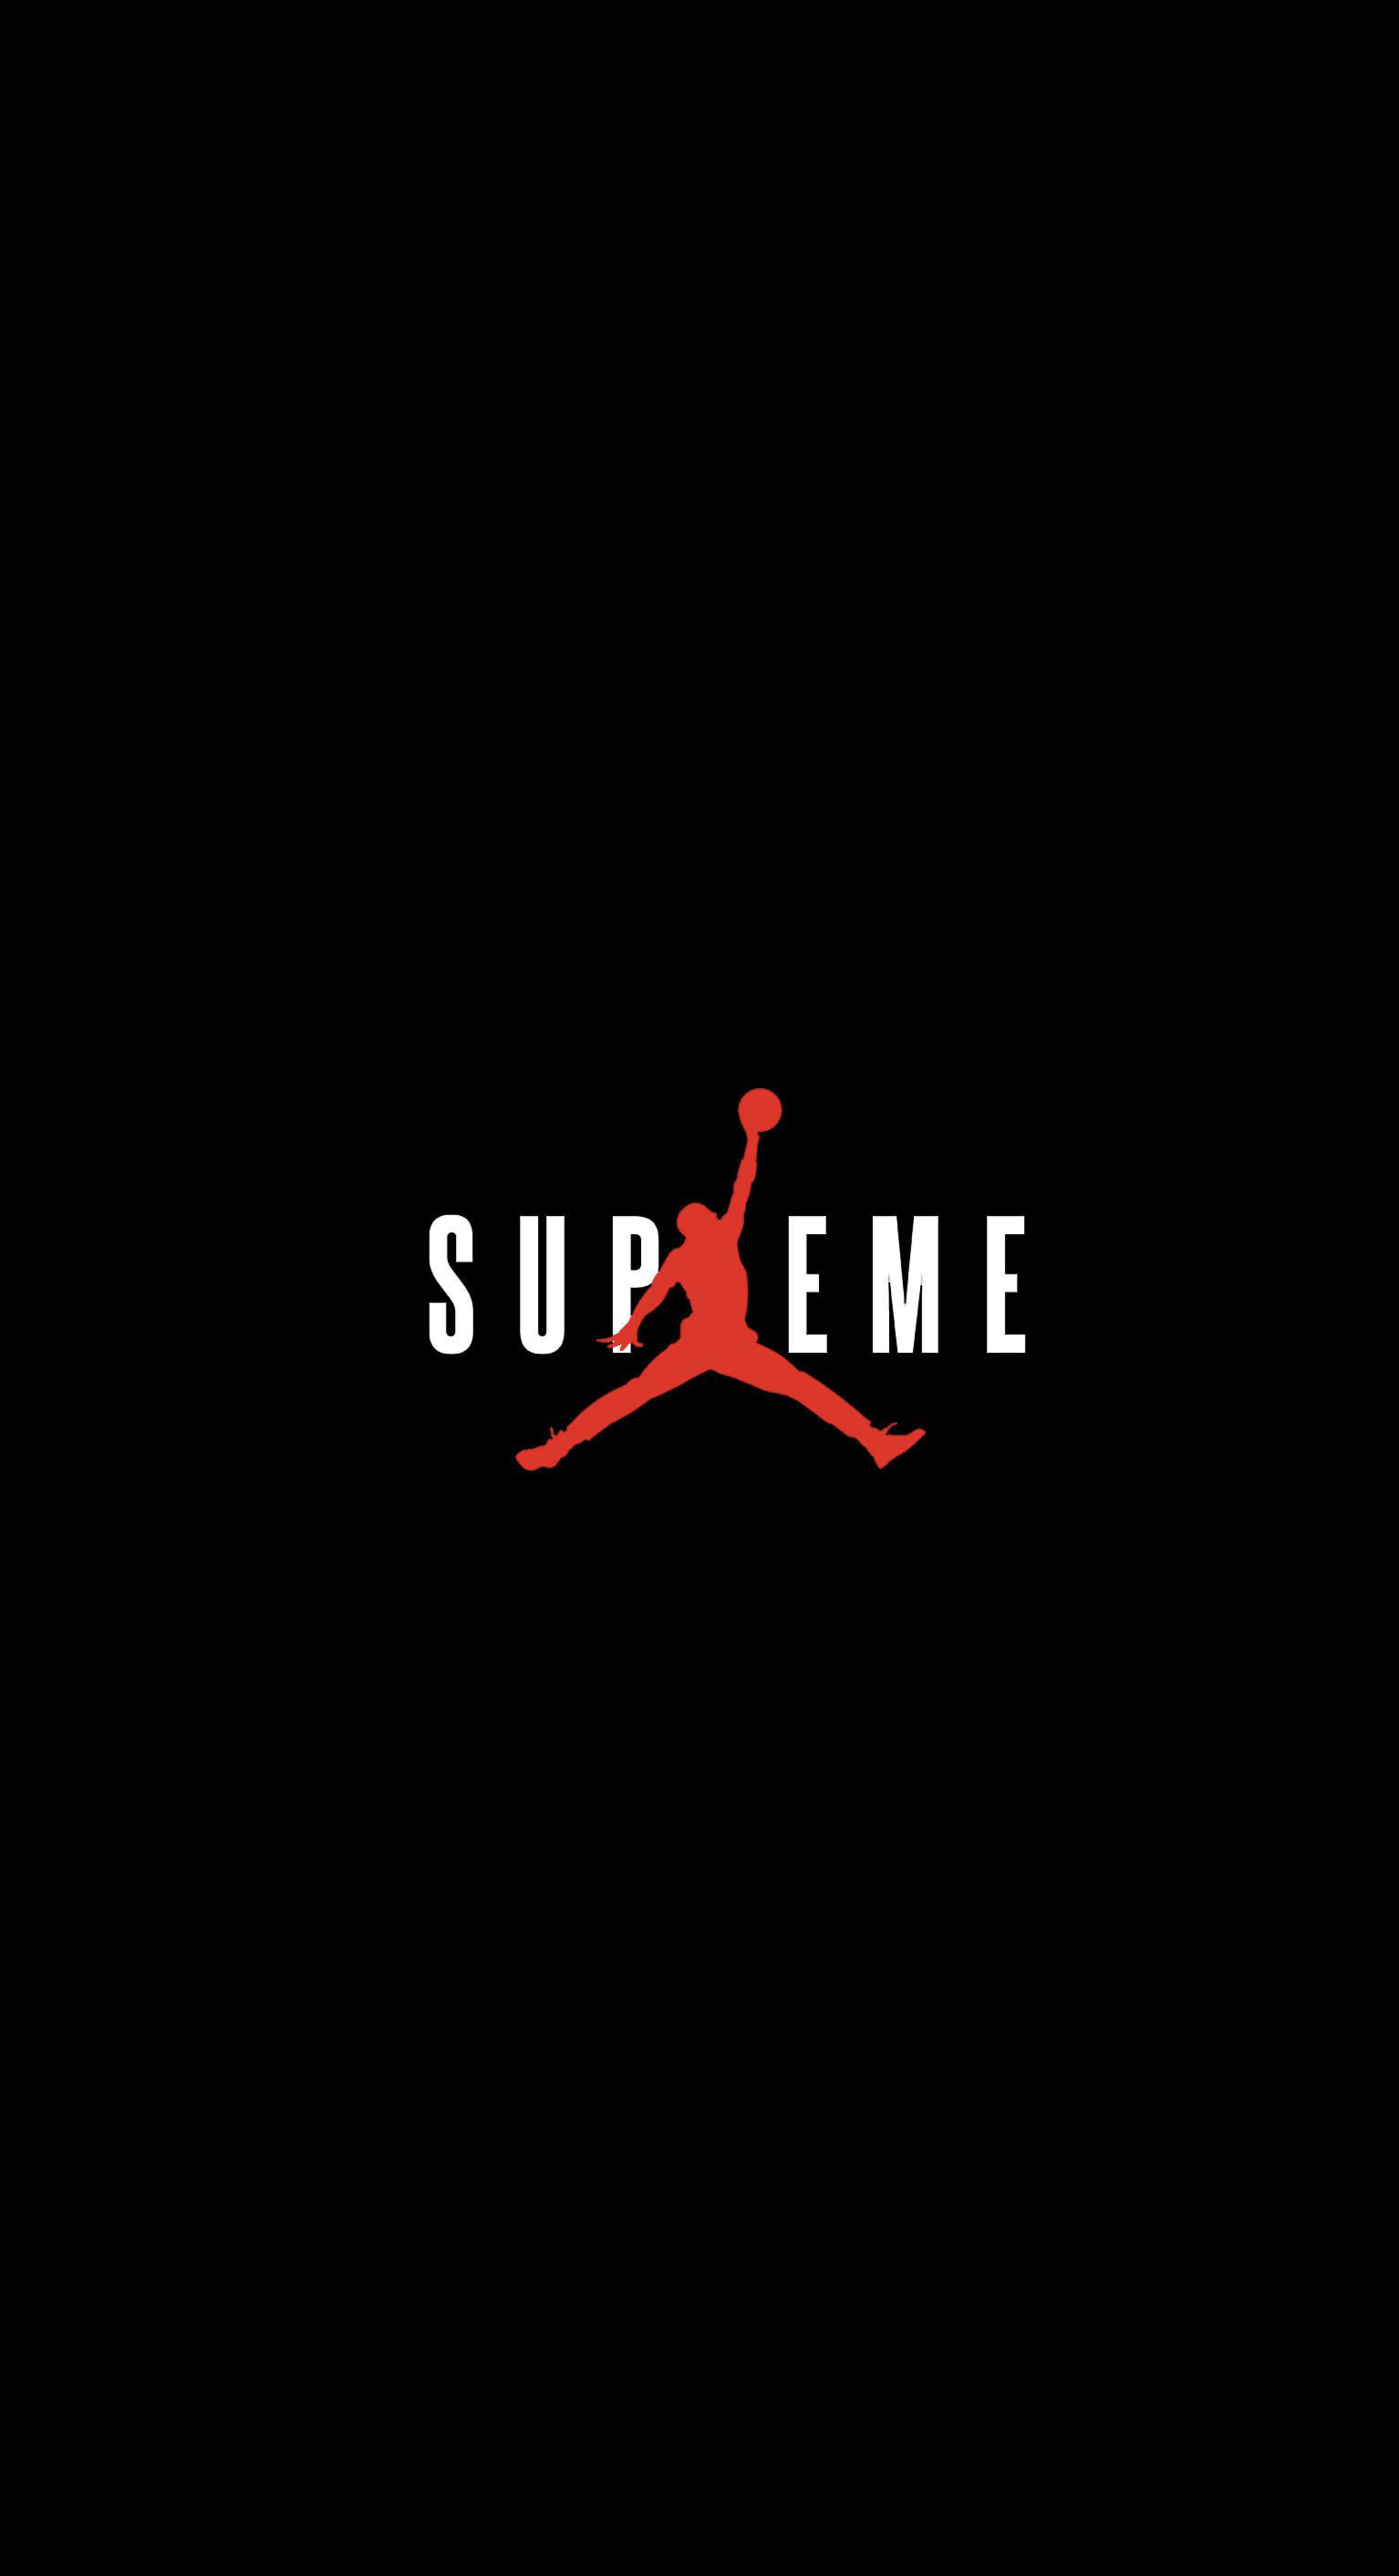 Supreme IPhone XR Wallpapers - Wallpaper Cave  Supreme wallpaper, Supreme  iphone wallpaper, Sports wallpapers